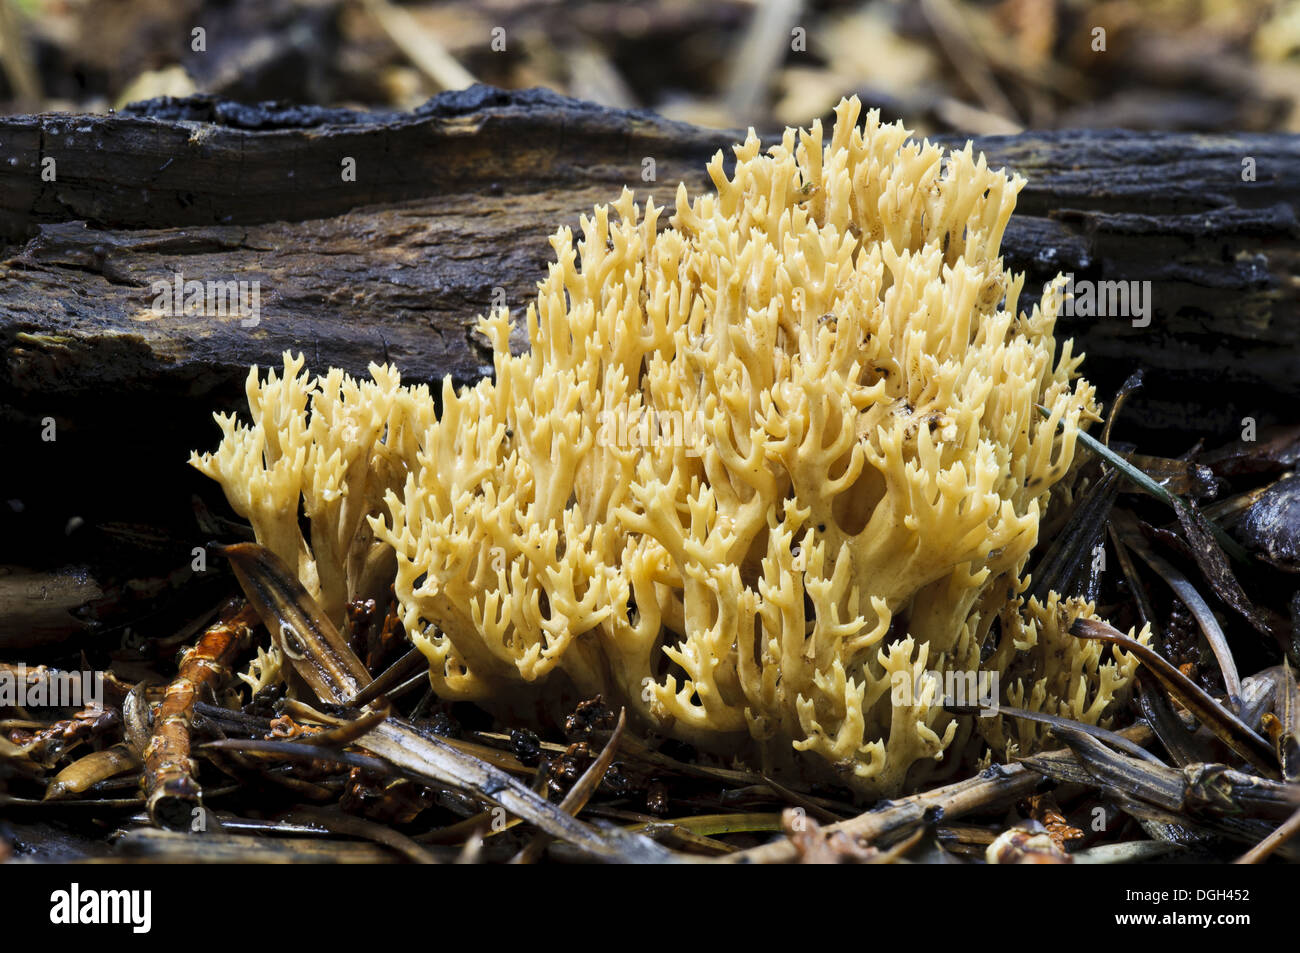 Upright Coral Fungus (Ramaria stricta) fruiting body growing on decaying twigs Sir Harold Hillier Gardens Romsey Hampshire Stock Photo